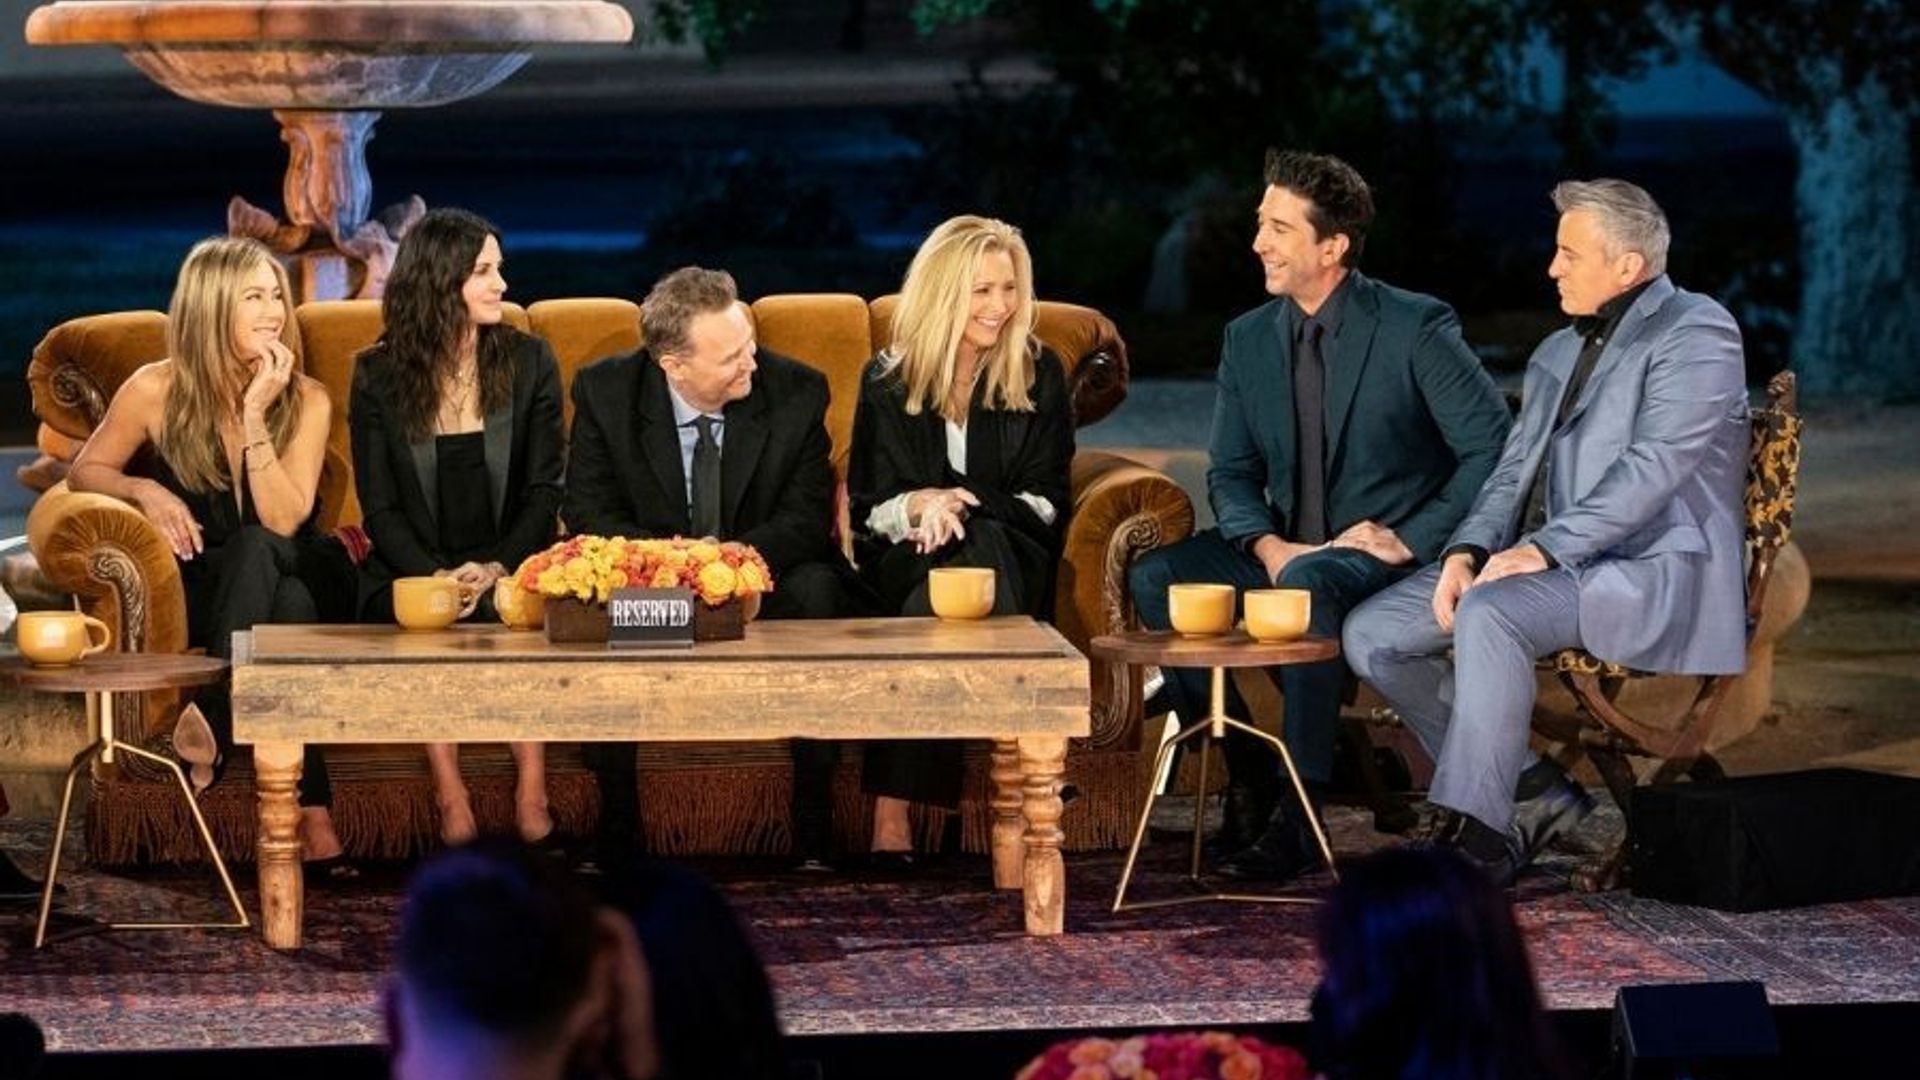 Lisa Kudrow reveals her favourite moment from the 'Friends' reunion that fans may have missed